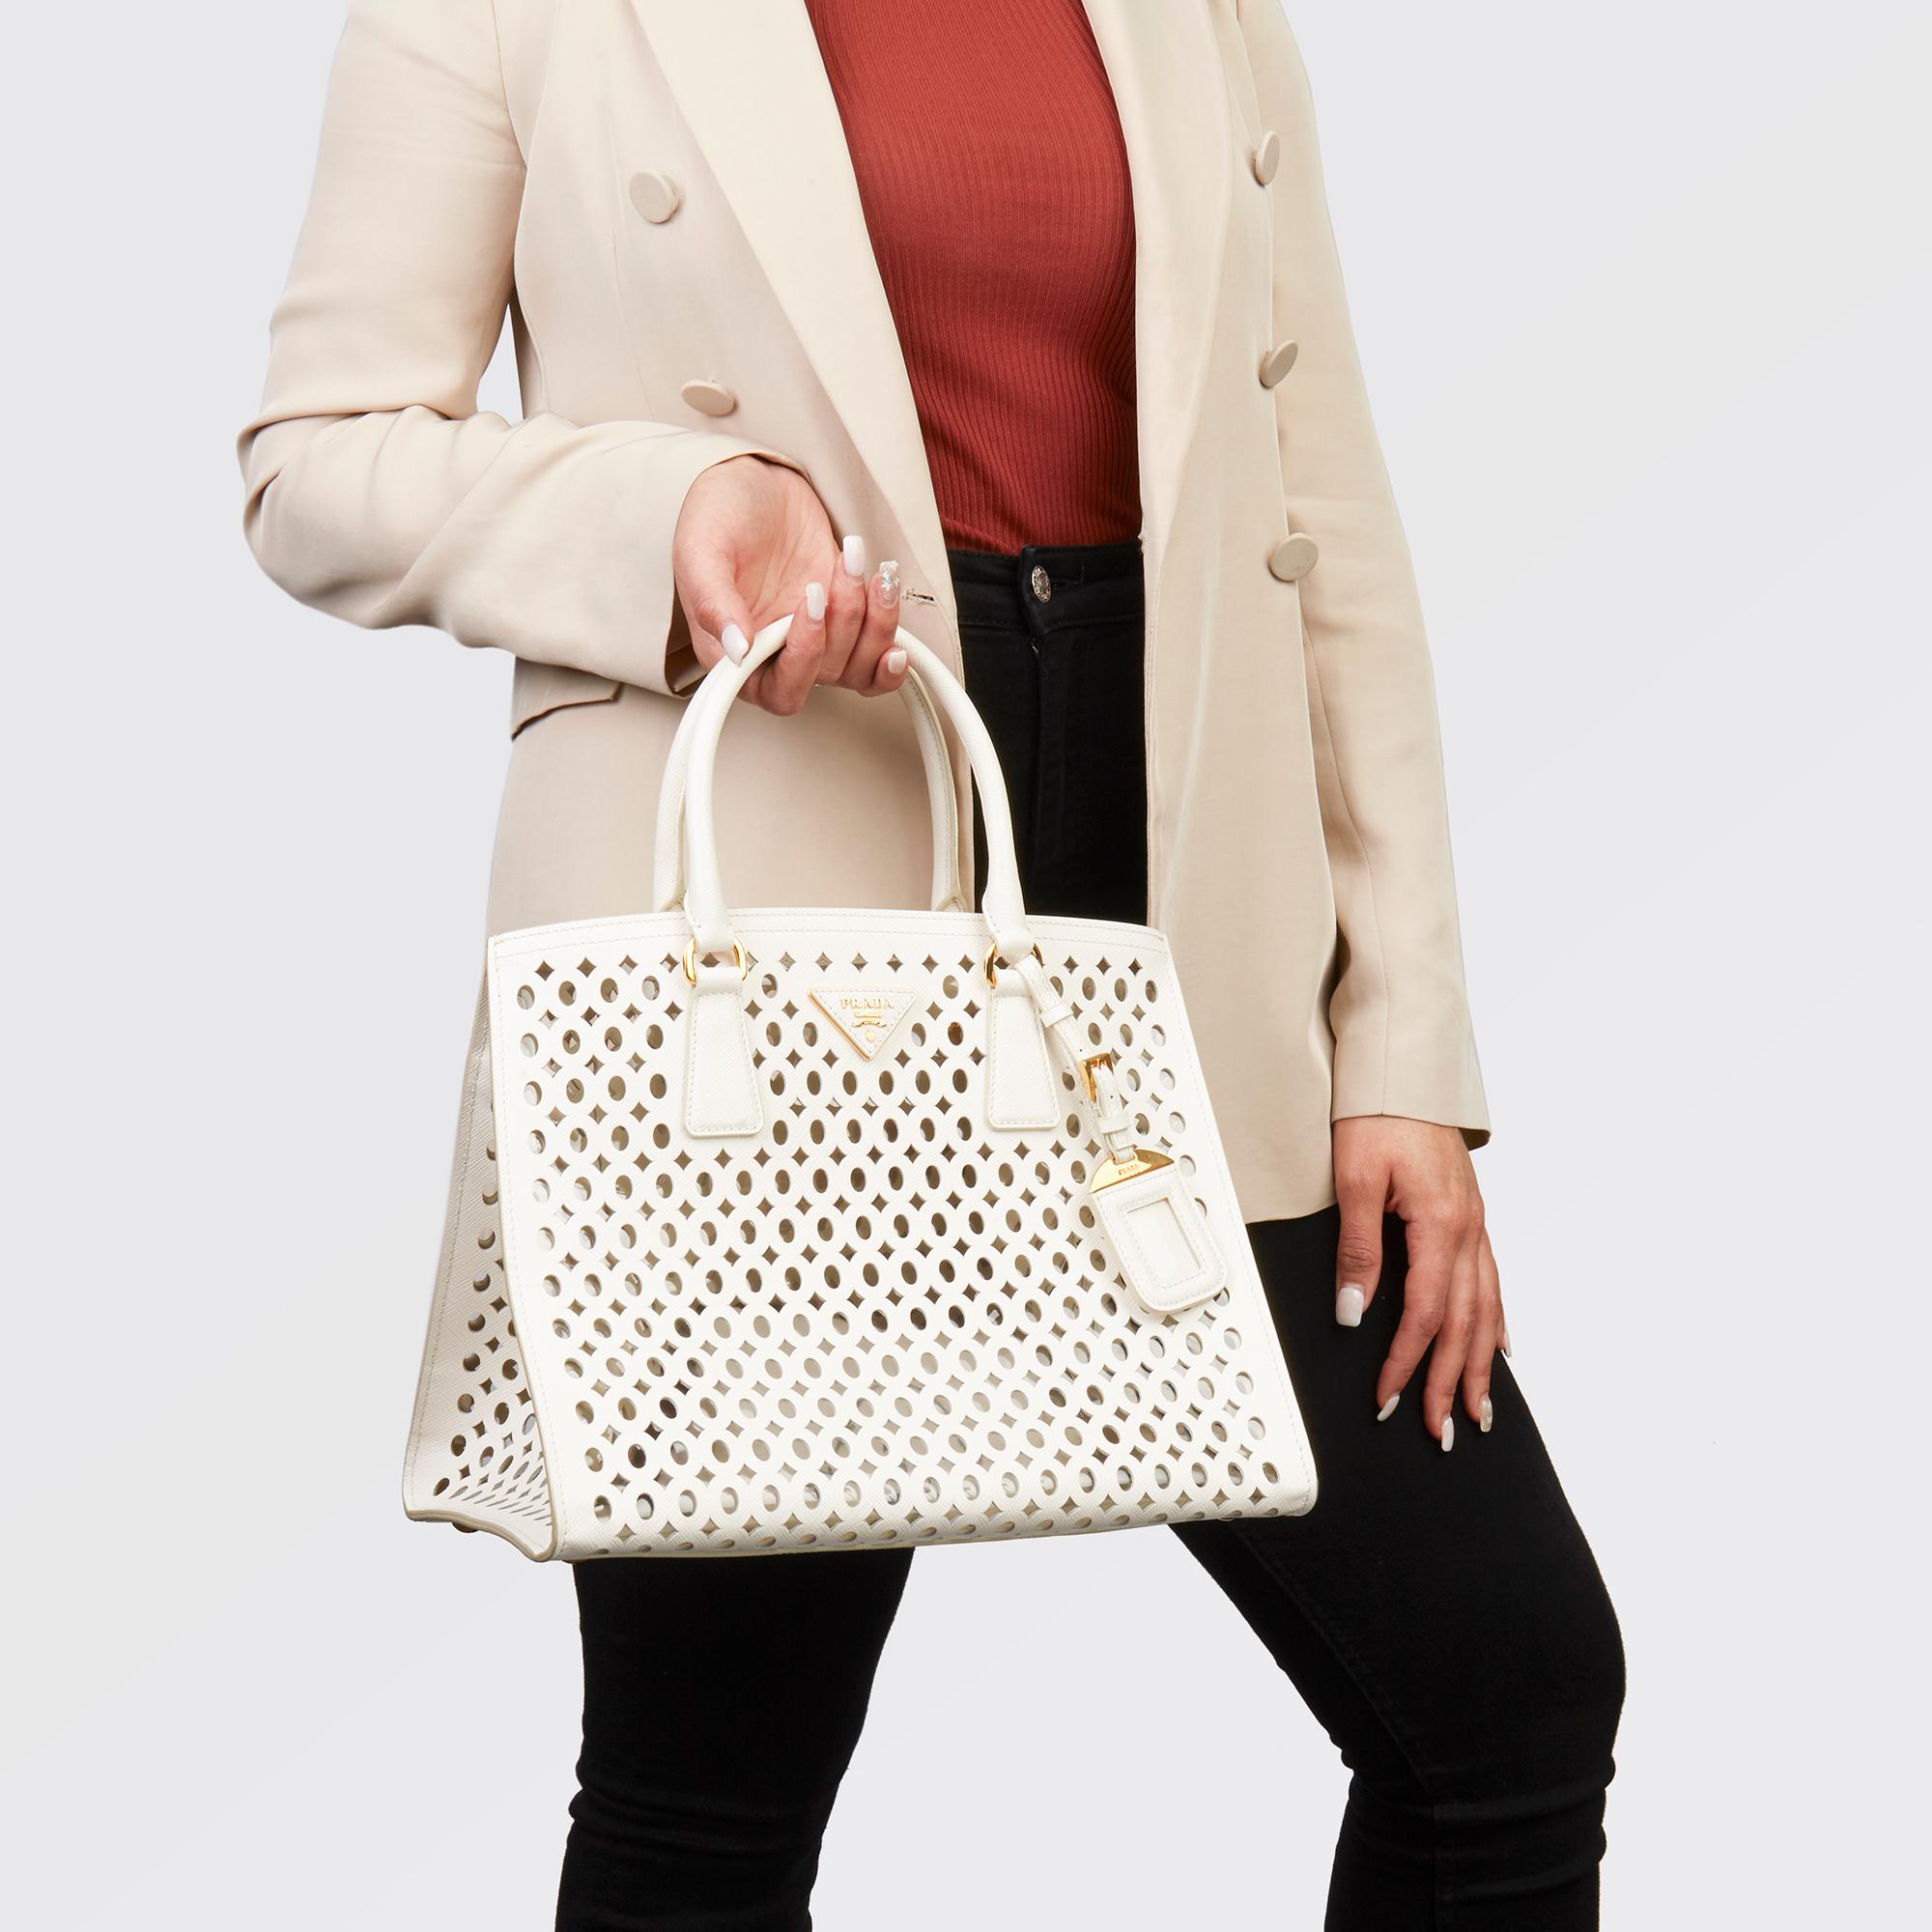 PRADA
White Perforated Saffiano Leather & PVC Fori Tote

Xupes Reference: HB3542
Serial Number: 25
Age (Circa): 2013
Accompanied By: Prada Dust Bag, Prada Invoice
Authenticity Details: Date Stamp (Made in Italy)
Gender: Ladies
Type: Top